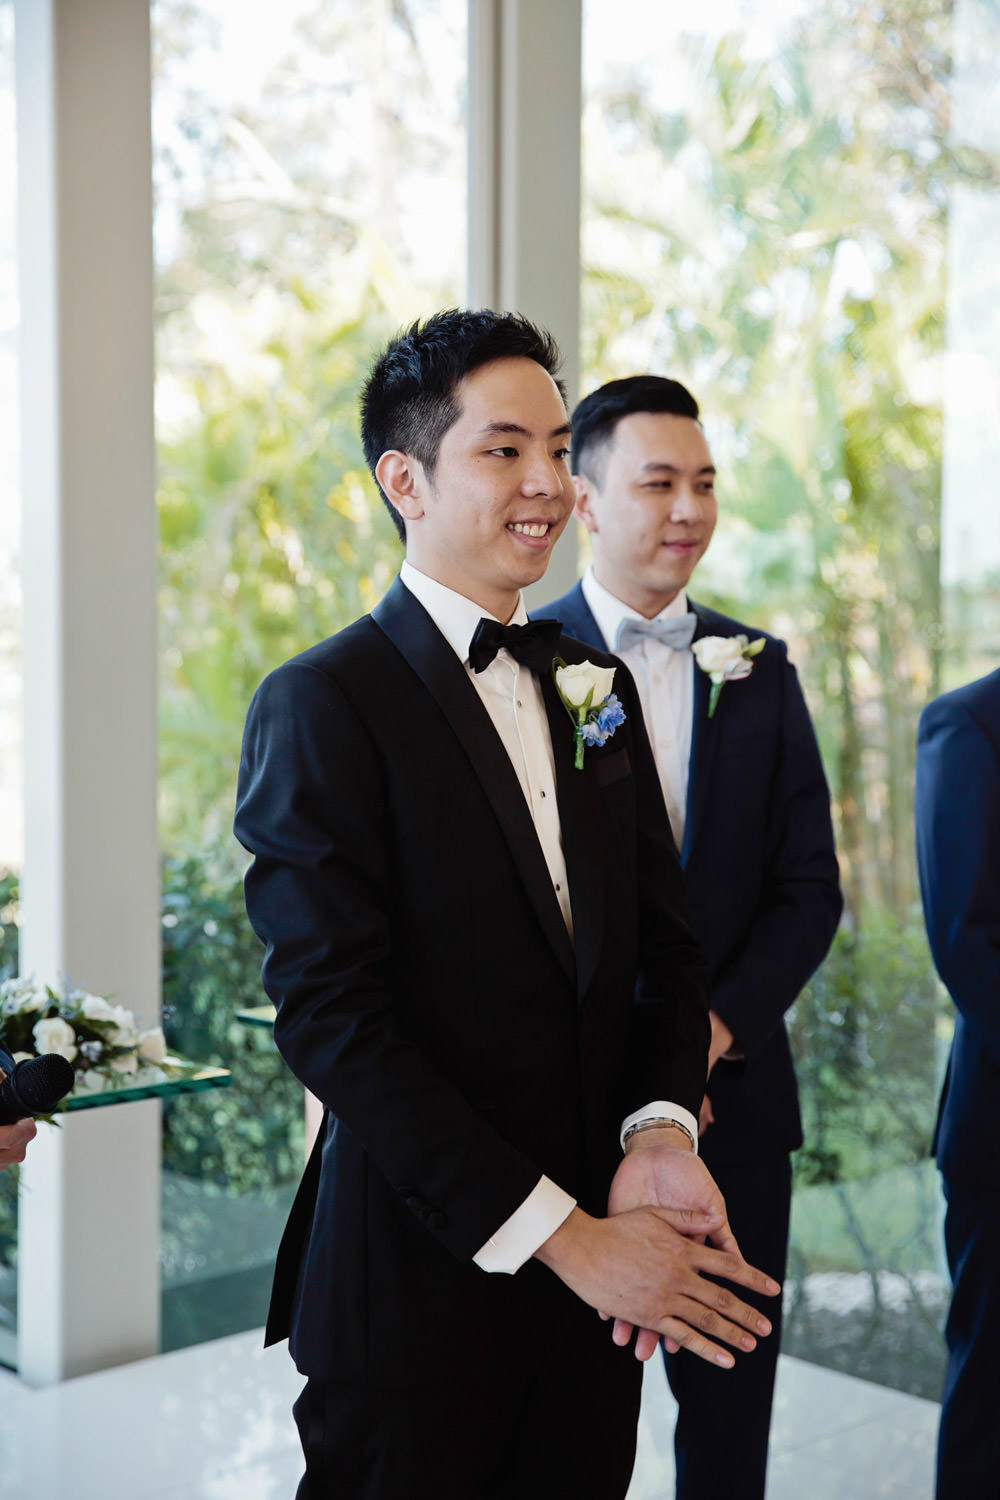 Groom-waiting-at_Sanctuary-cove-wedding-chapel-romantic-photography_quincenmulberrystudios